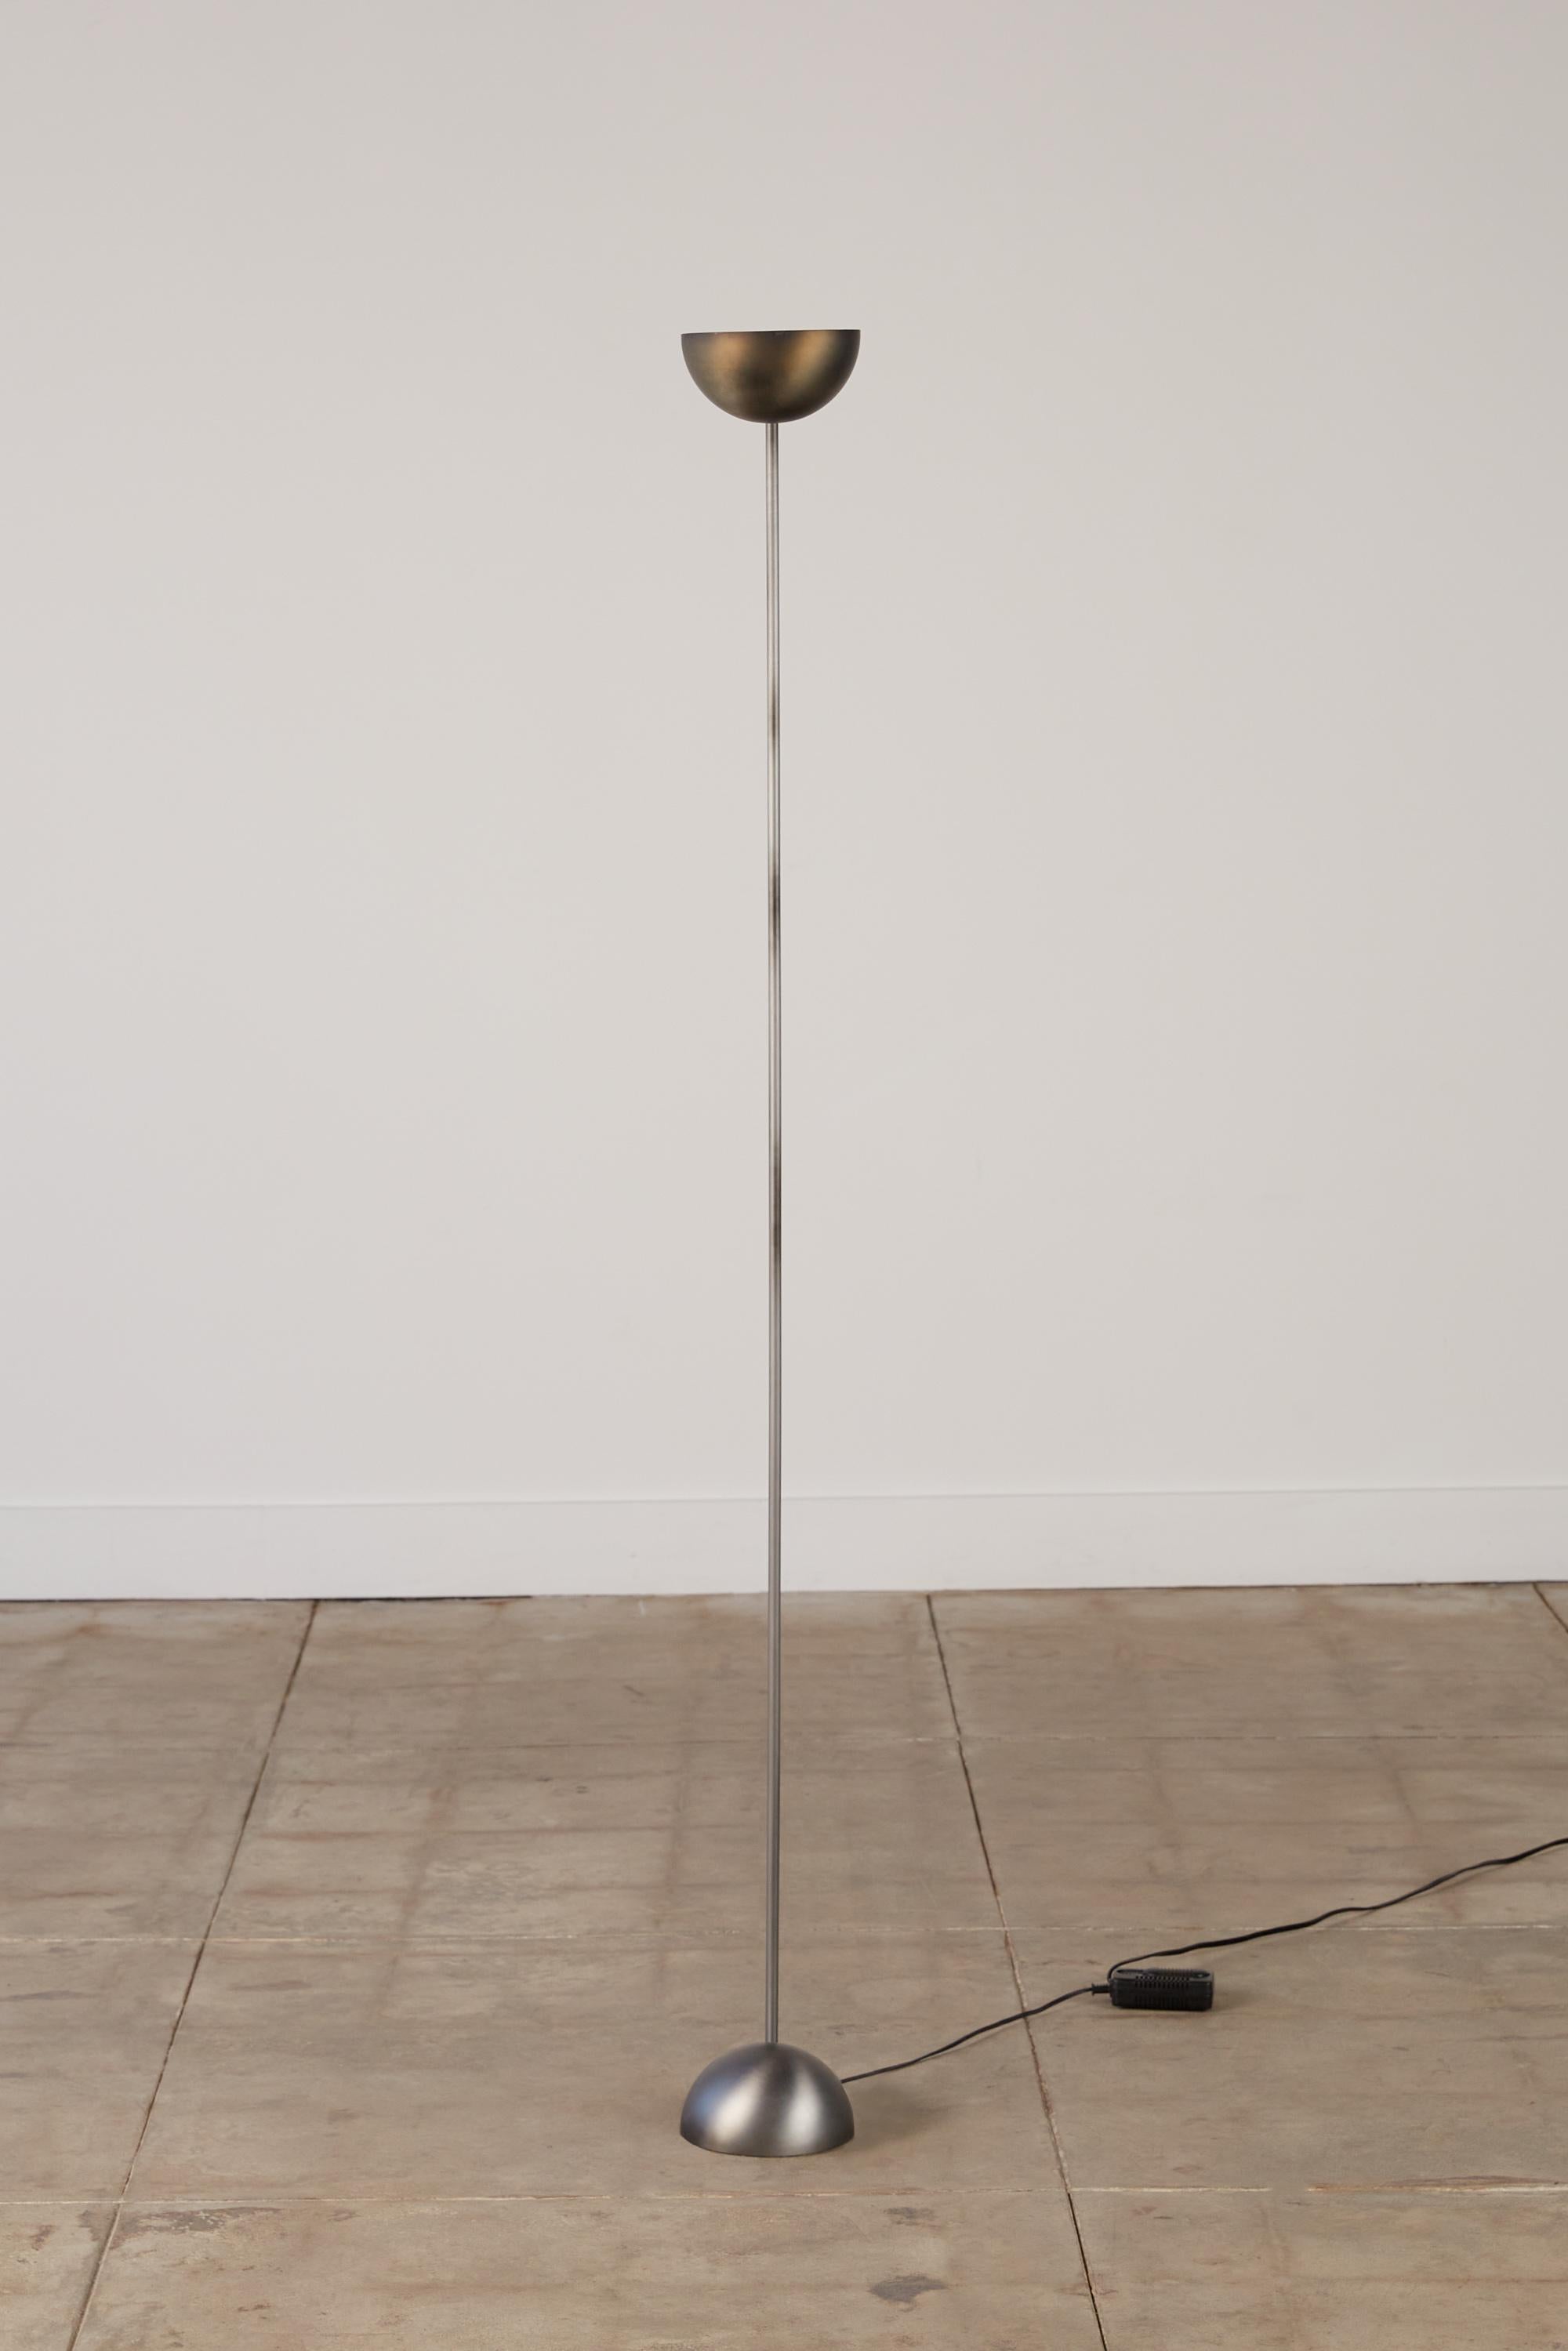 Postmodern torchiere floor lamp by George Kovacs in a brushed metal finish. The lamp uses an exposed half-sphere as both its base and shade and held together but a long thin stem. The lamp retains its original wiring.

George Kovacs is one the